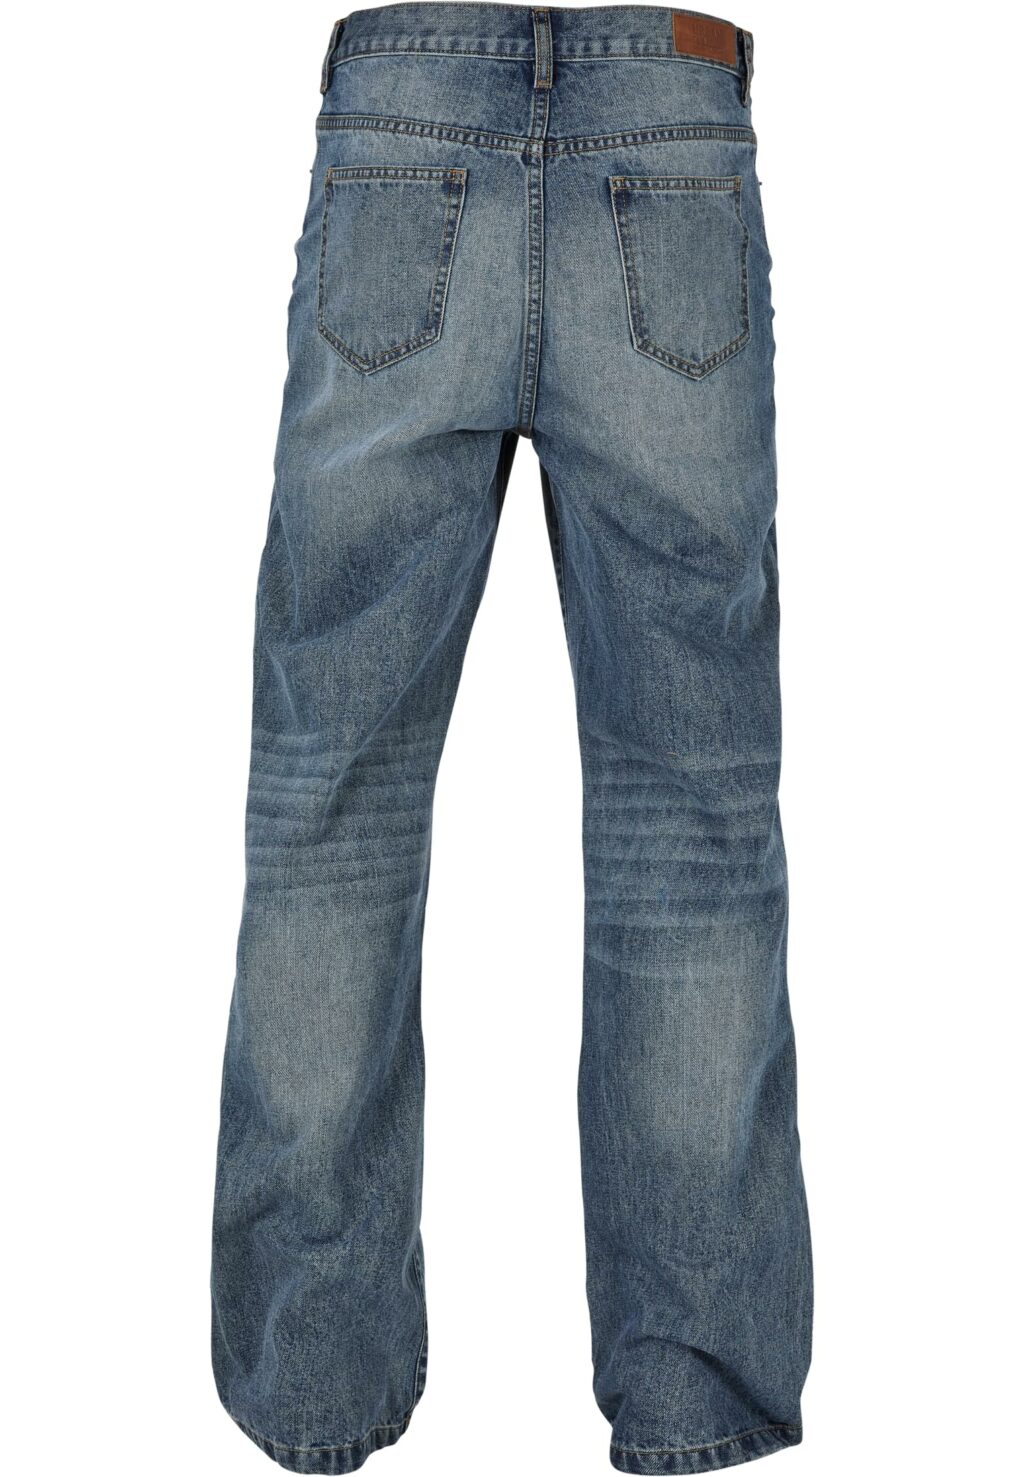 Urban Classics Flared Jeans sand destroyed washed TB6281